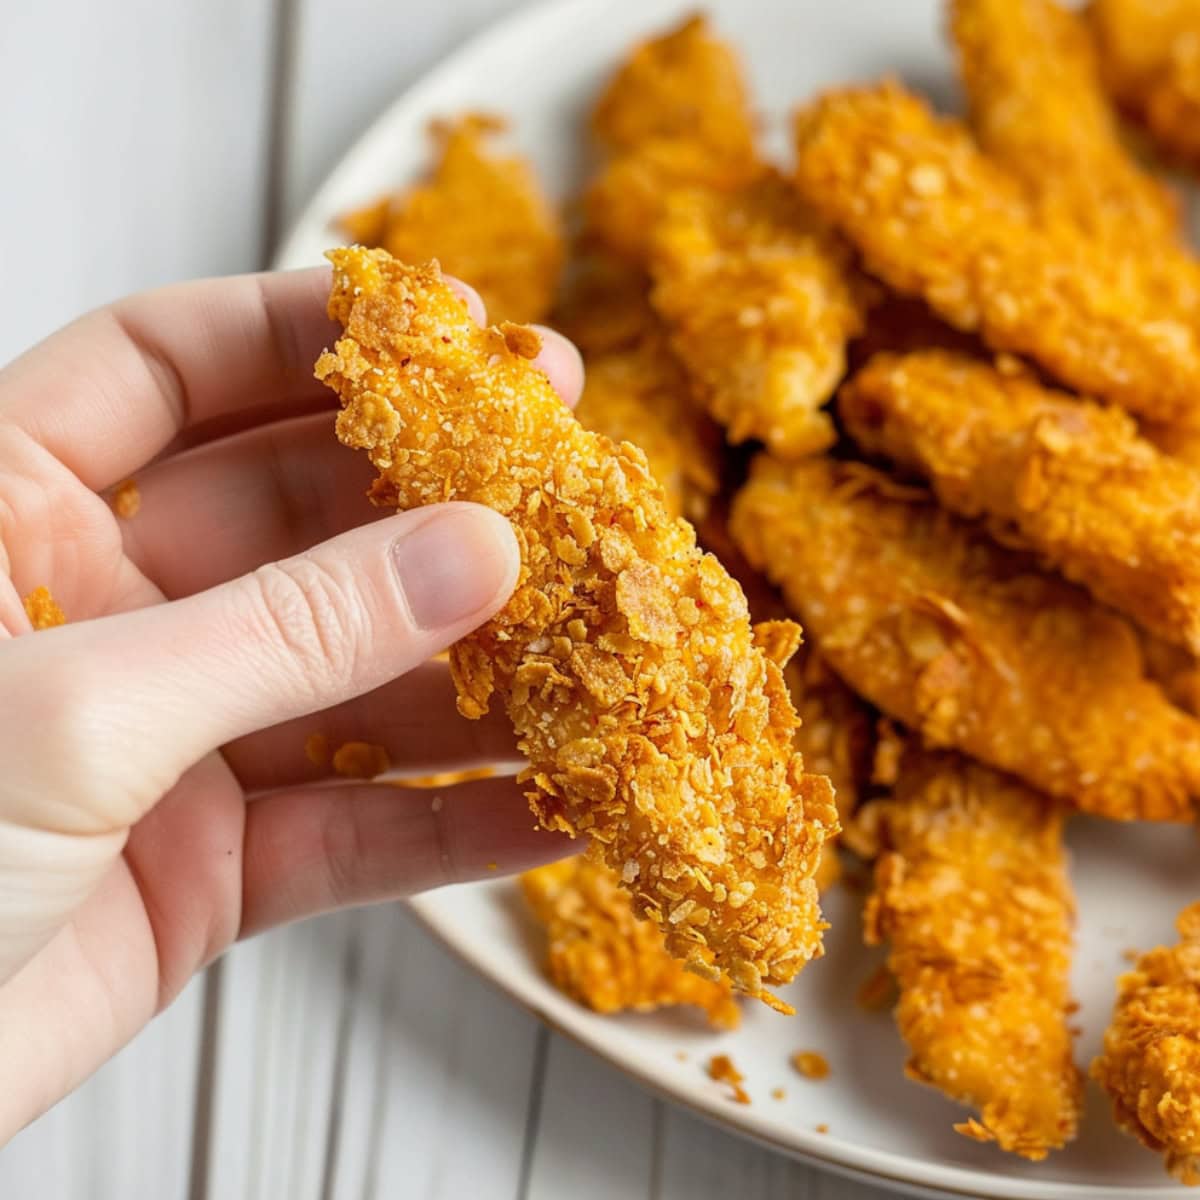 Hand holding a piece of cornflake coated chicken tenders.